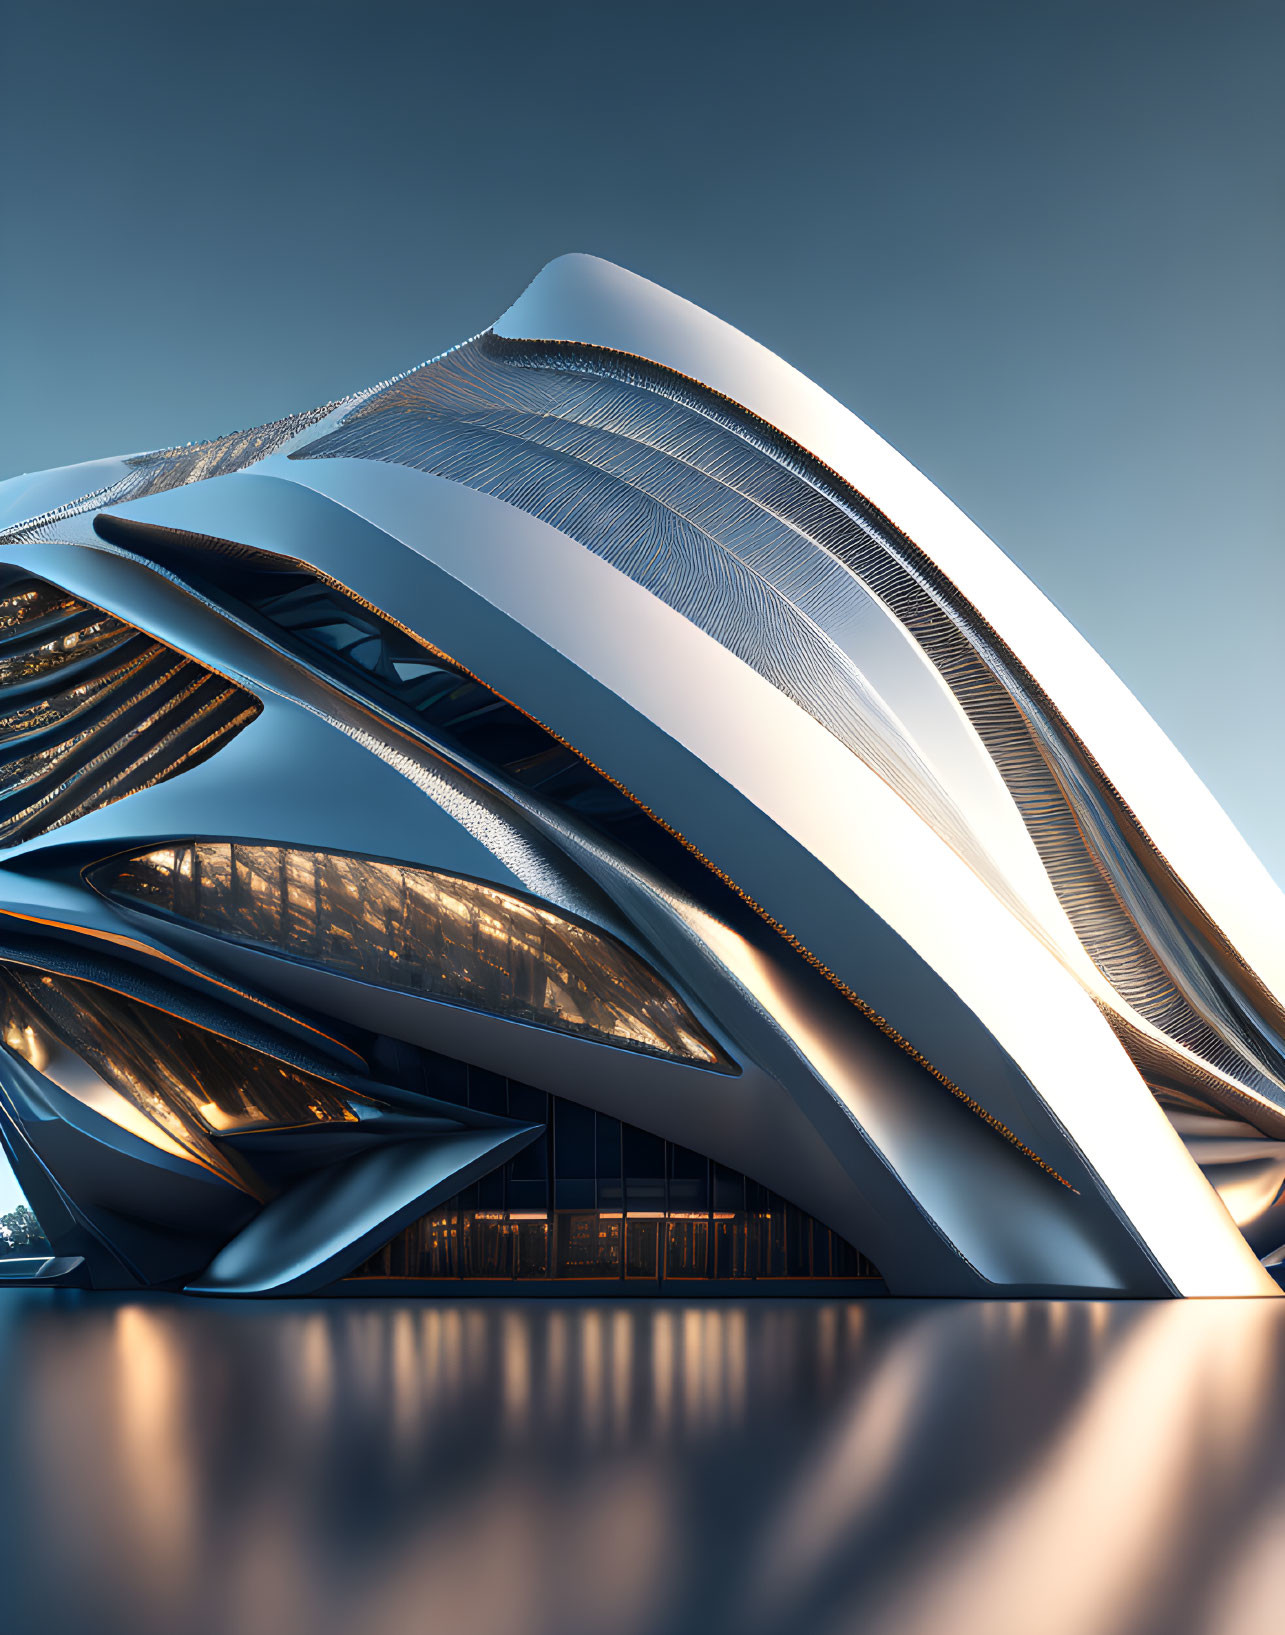 Futuristic building with organic shapes, metallic and glass materials against blue sky